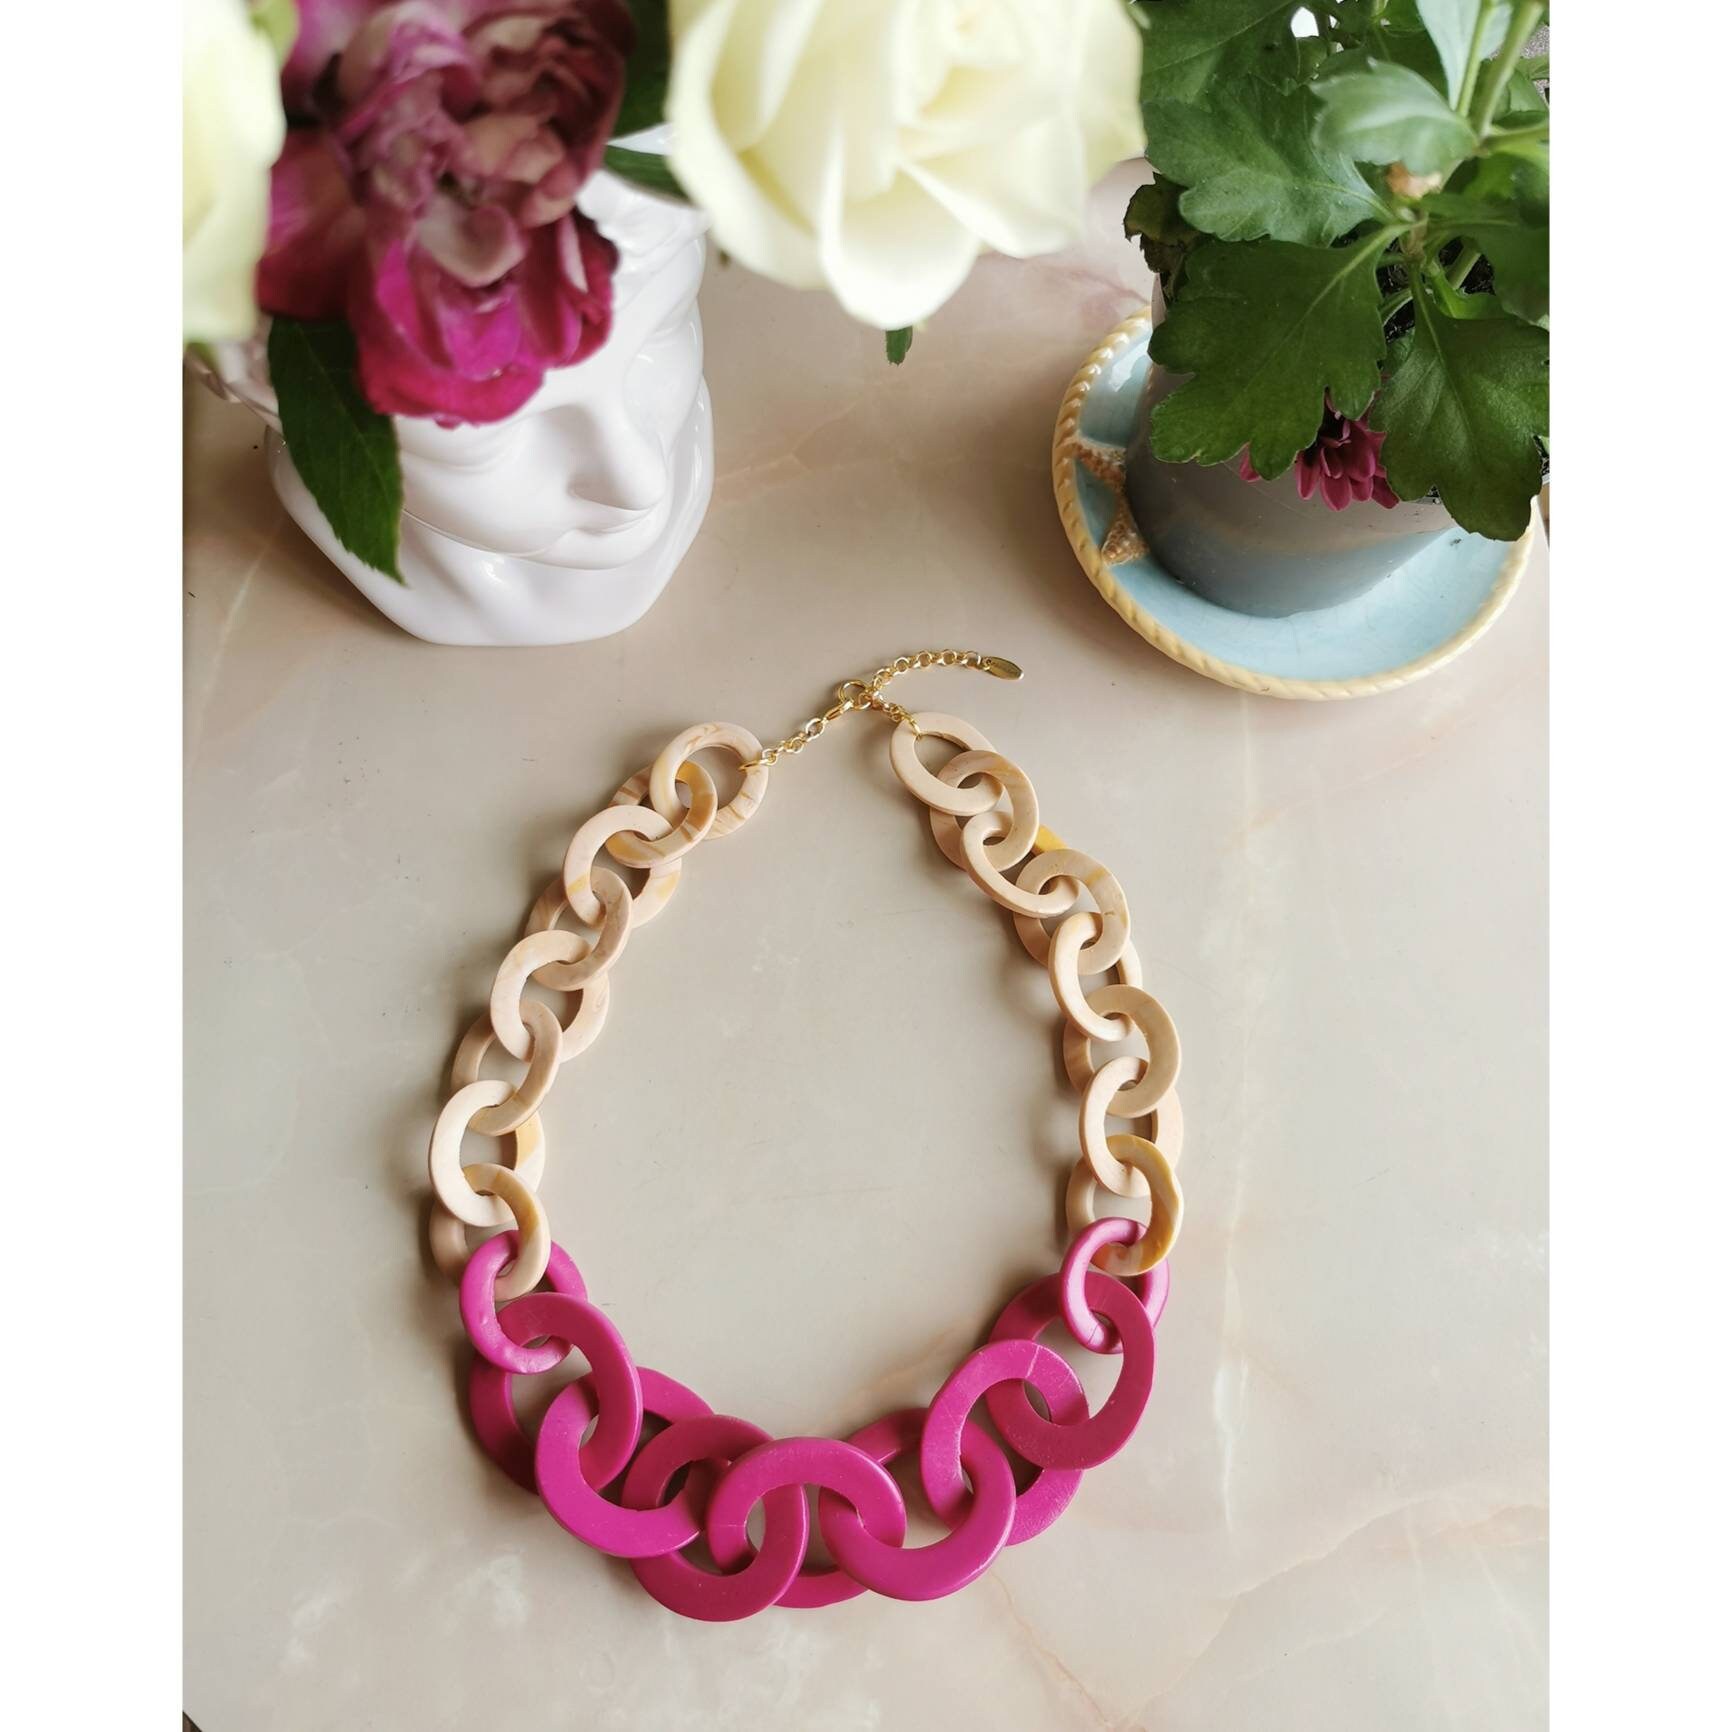 Splendid Pink Stone Beads Necklace Layers Baroque Sheets Chunky Stone  Summer Necklace Jewelry Hot TN154